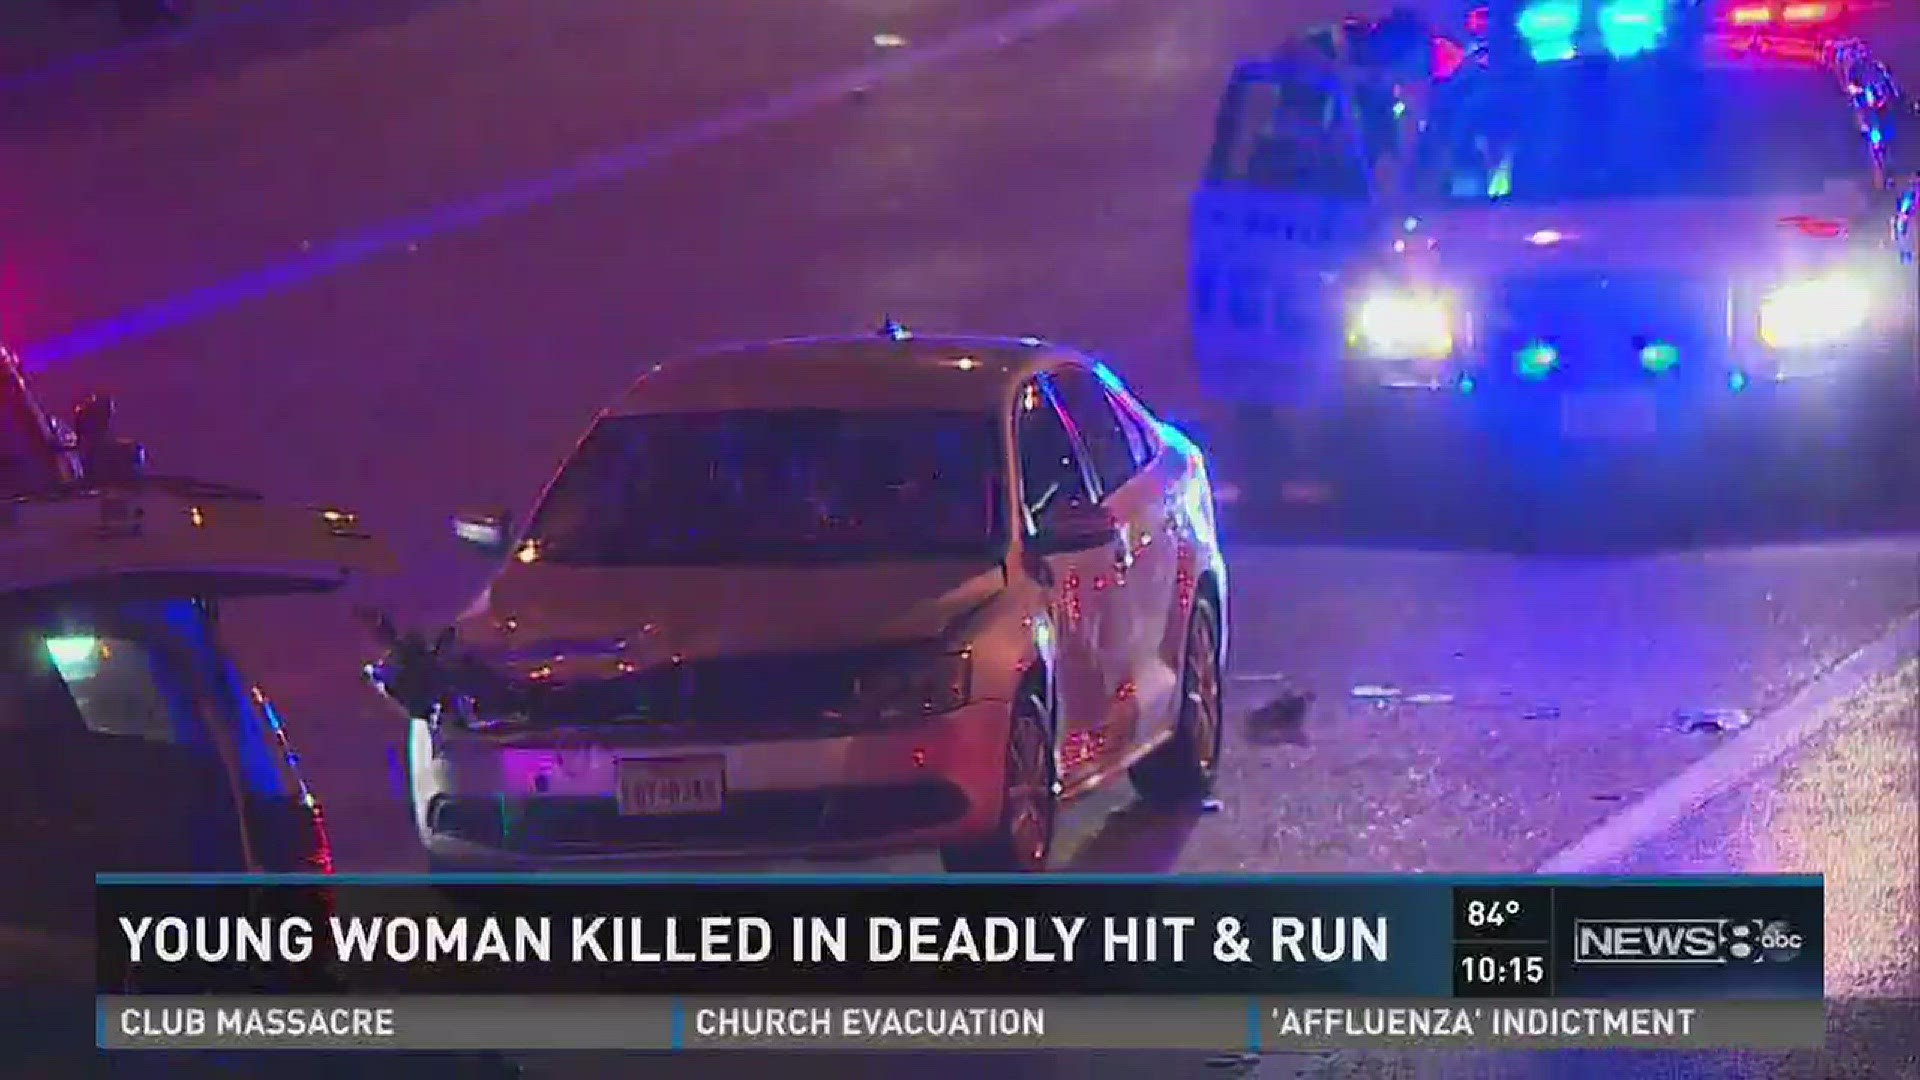 21-year-old charged in deadly hit and run